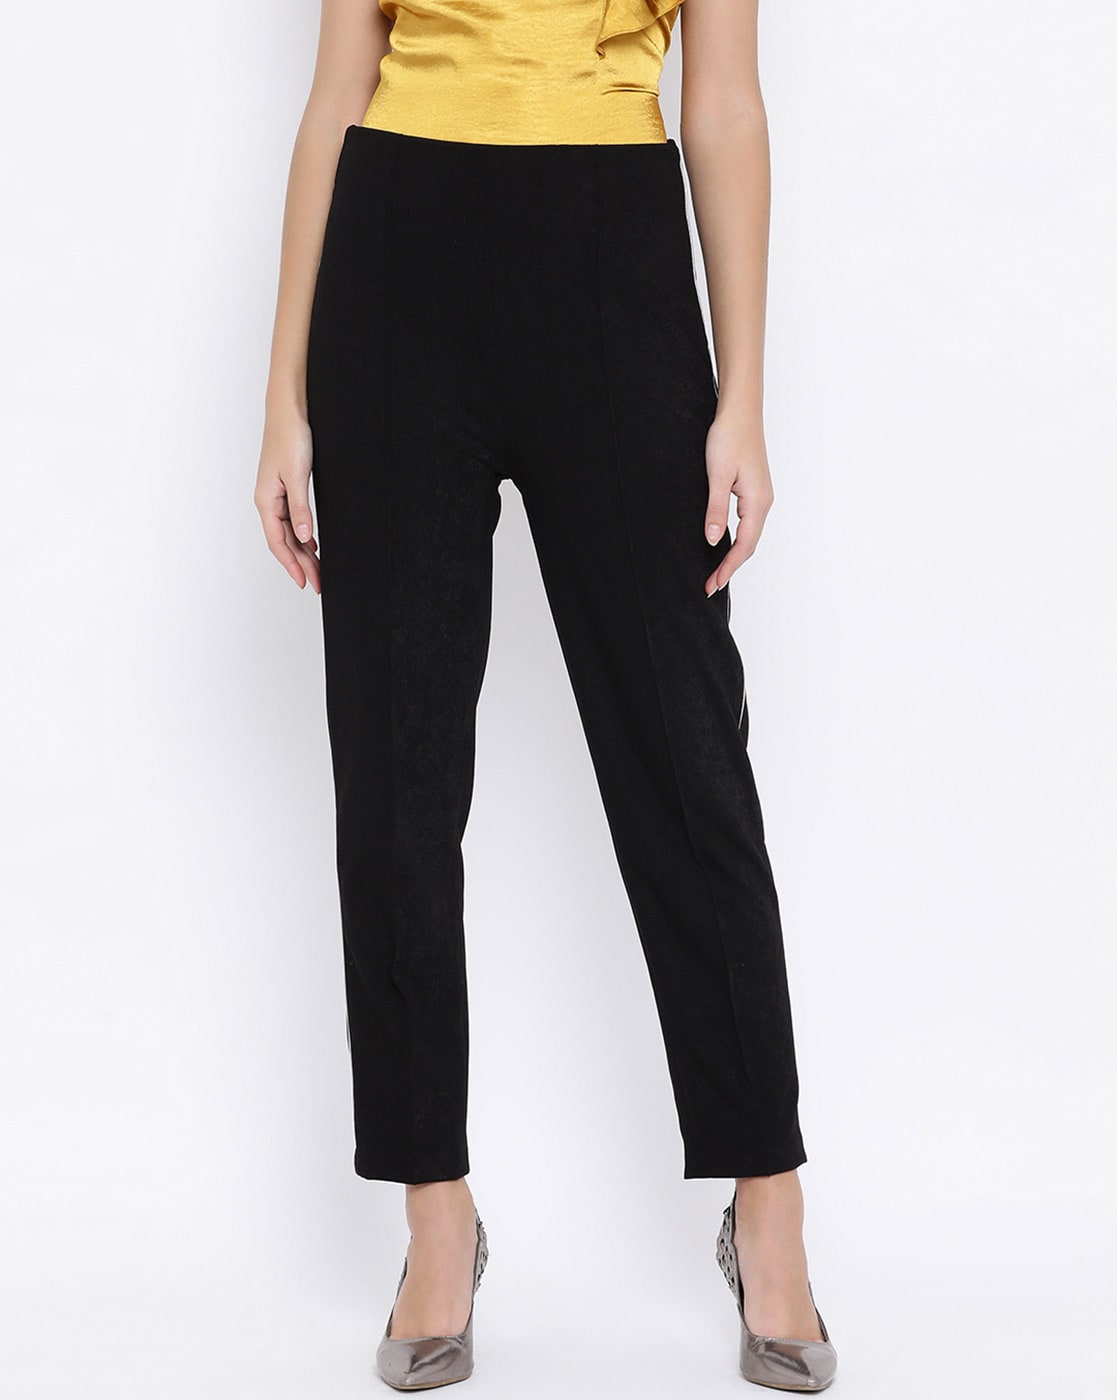 Raw Silk Pants for Women - Slim Fit Trousers